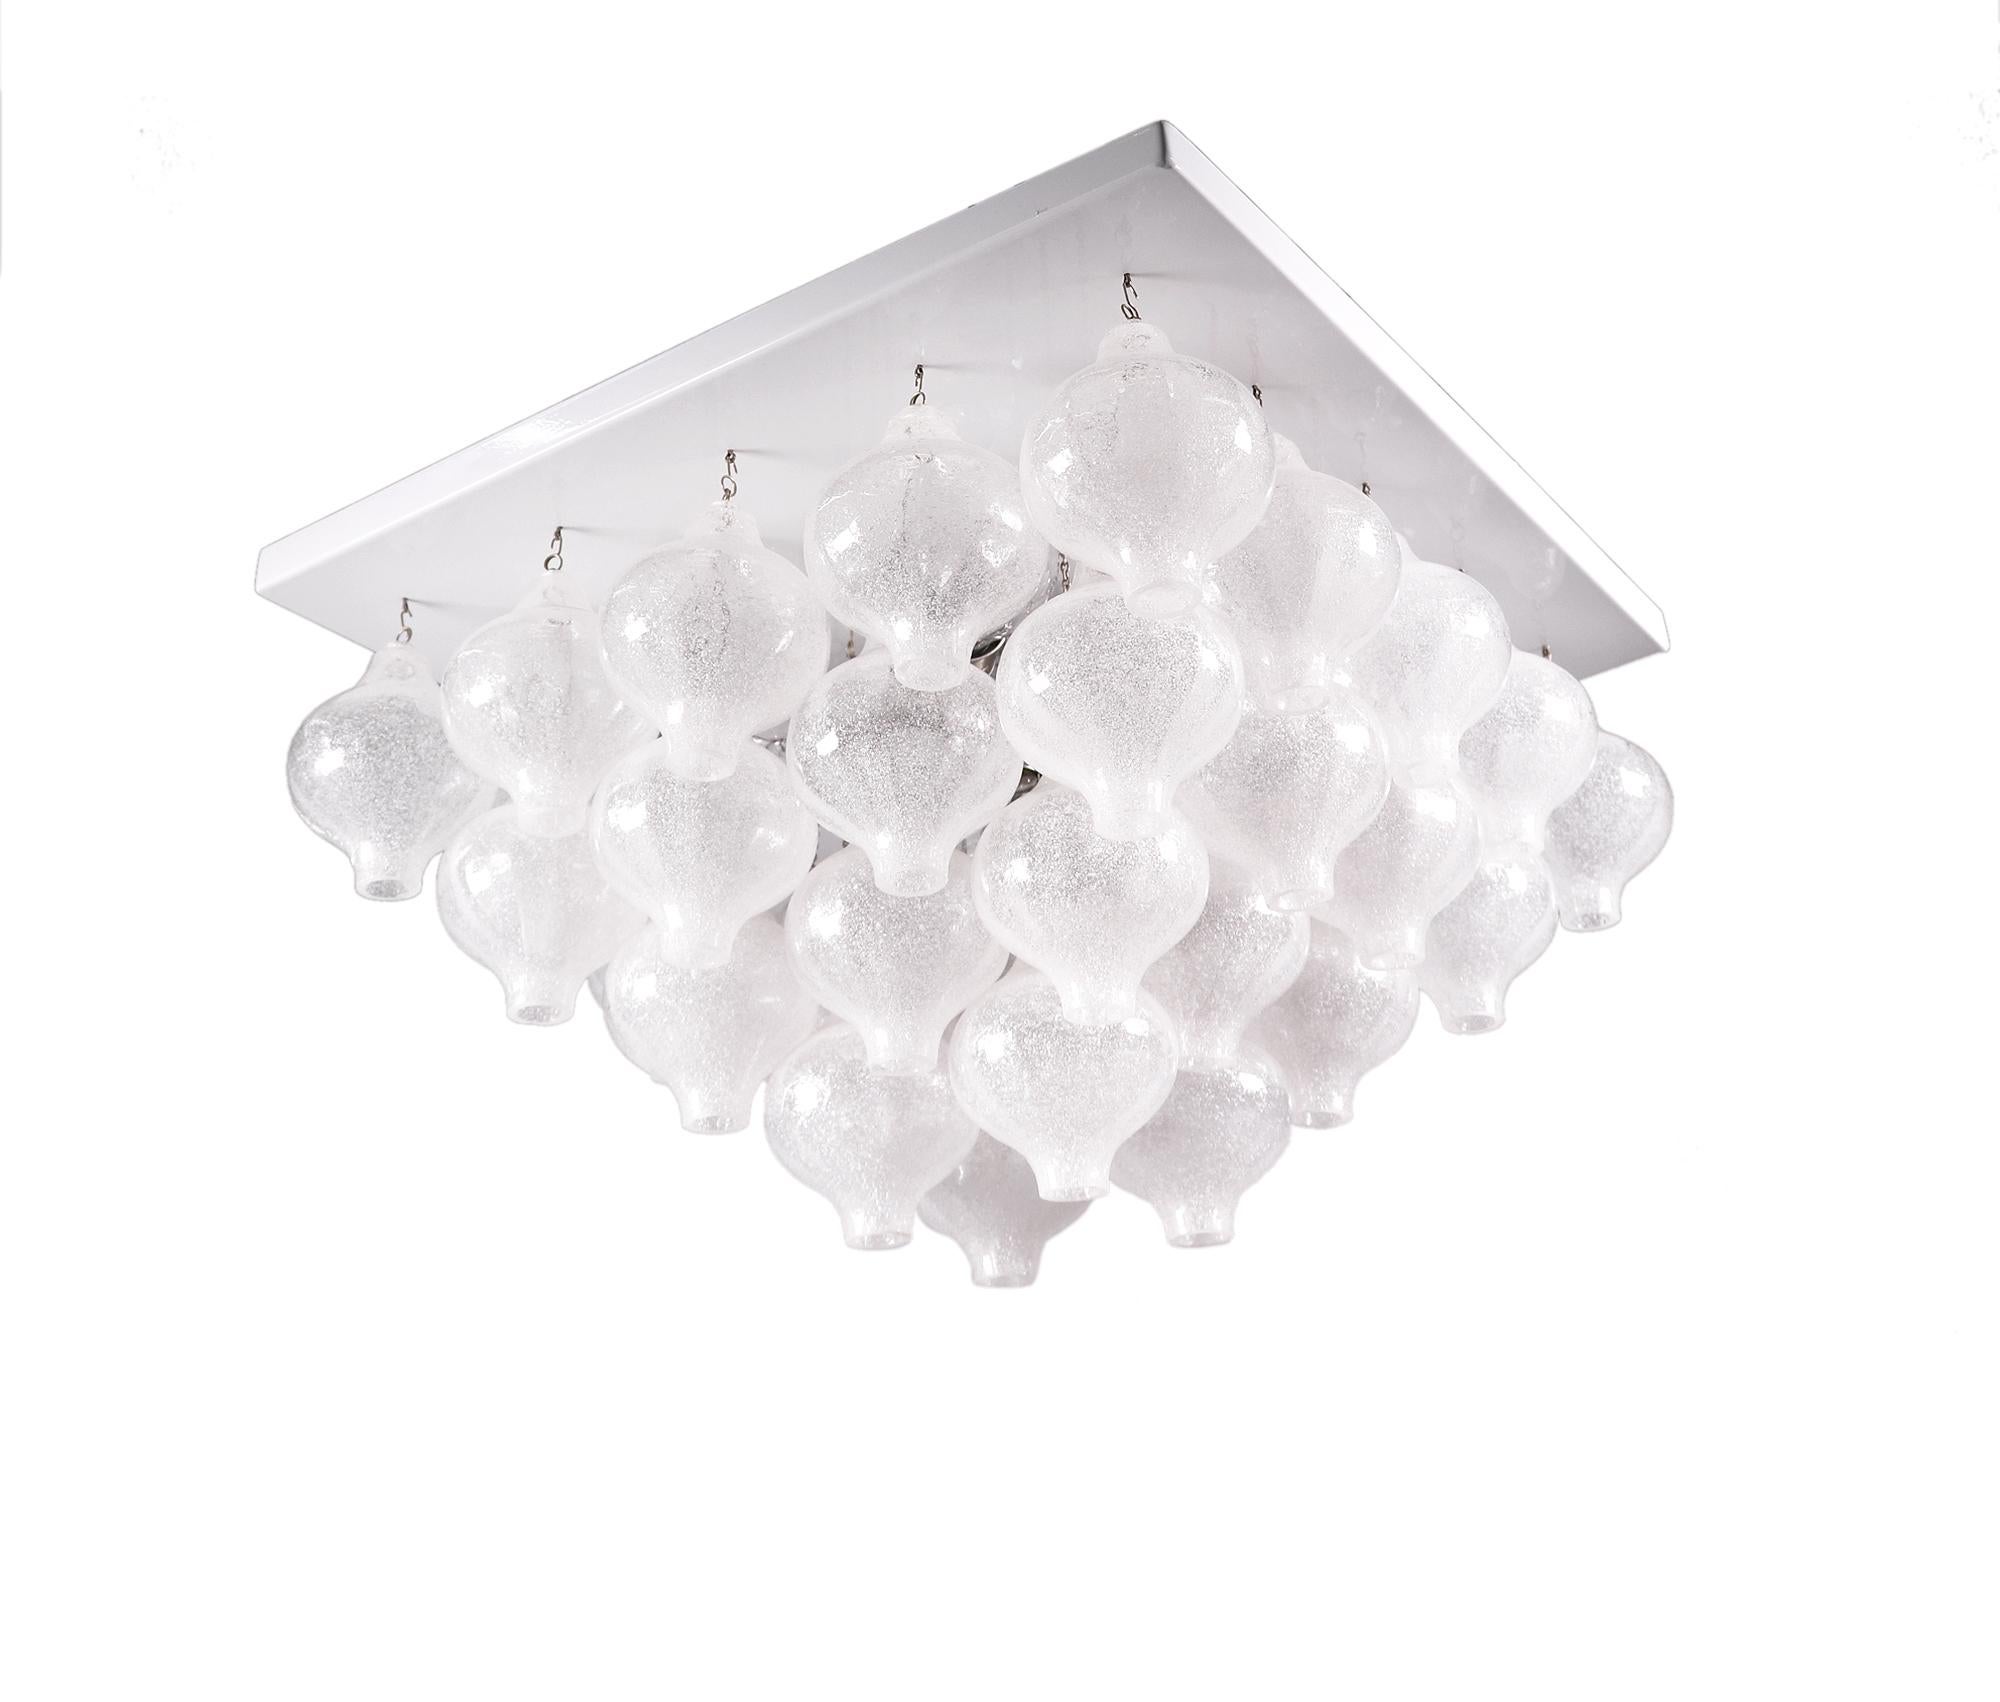 Gorgeous pyramid flush mount chandelier with white Tulipan Murano glasses on a nickel frame. The handcrafted onion shaped glass balls hanging down on chains attached to a white lacquered rectangular base plate. Chandelier illuminates beautifully and